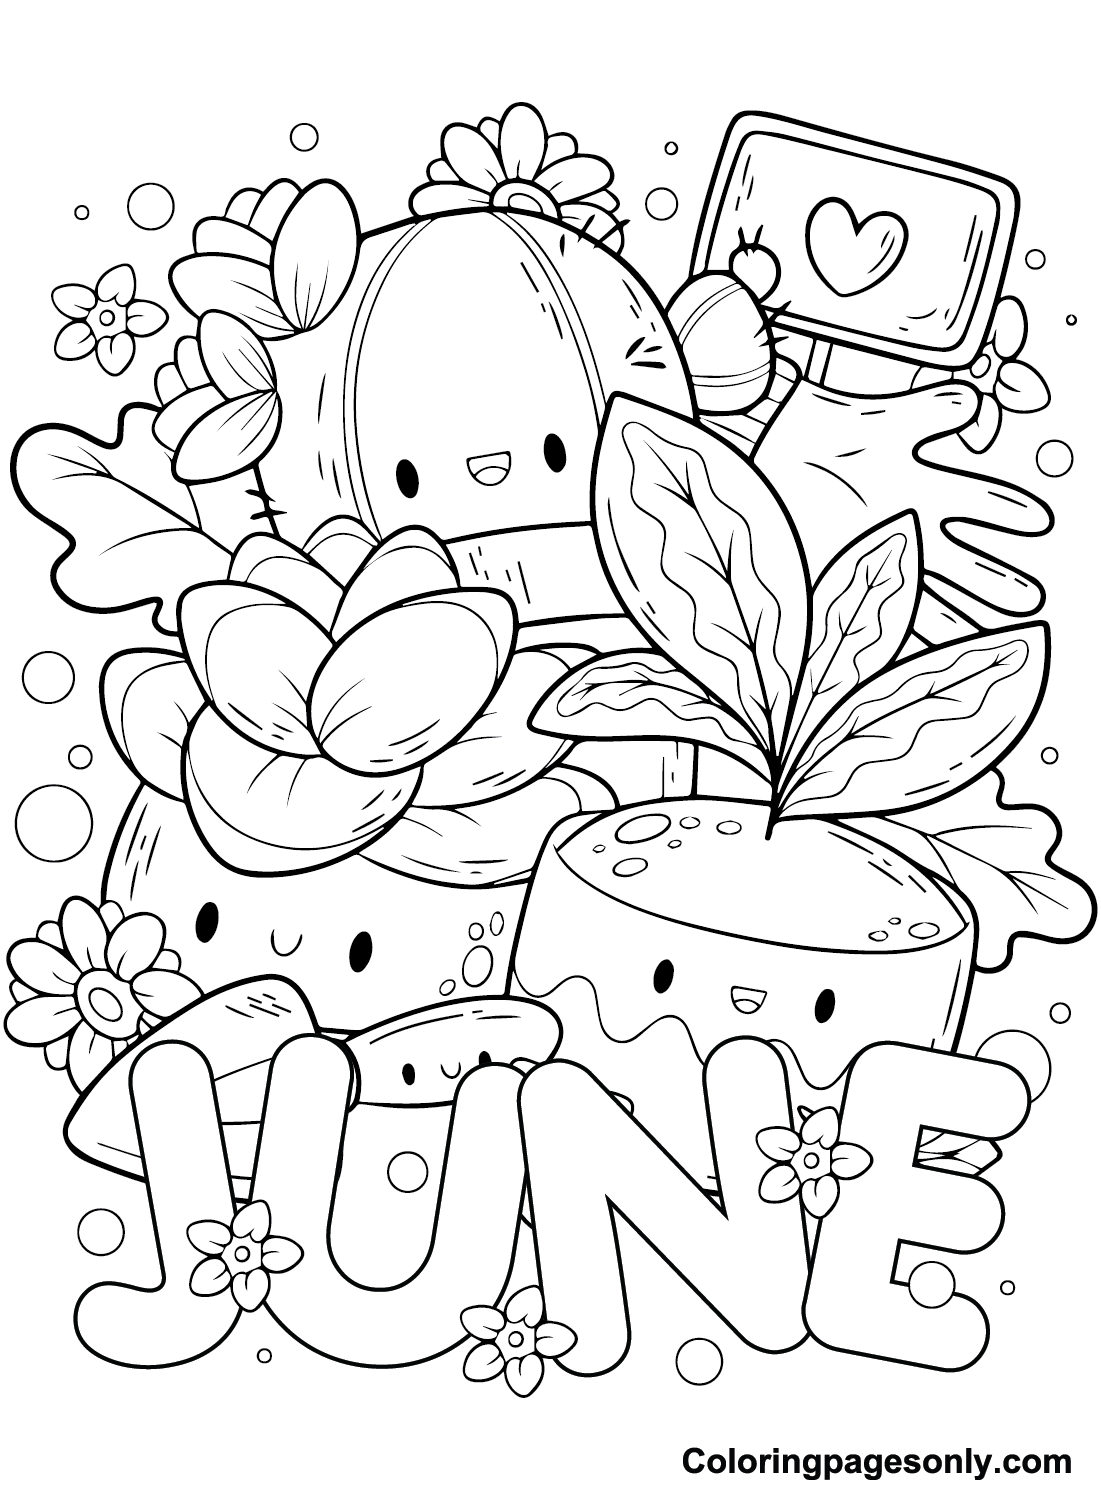 June Free Coloring Page